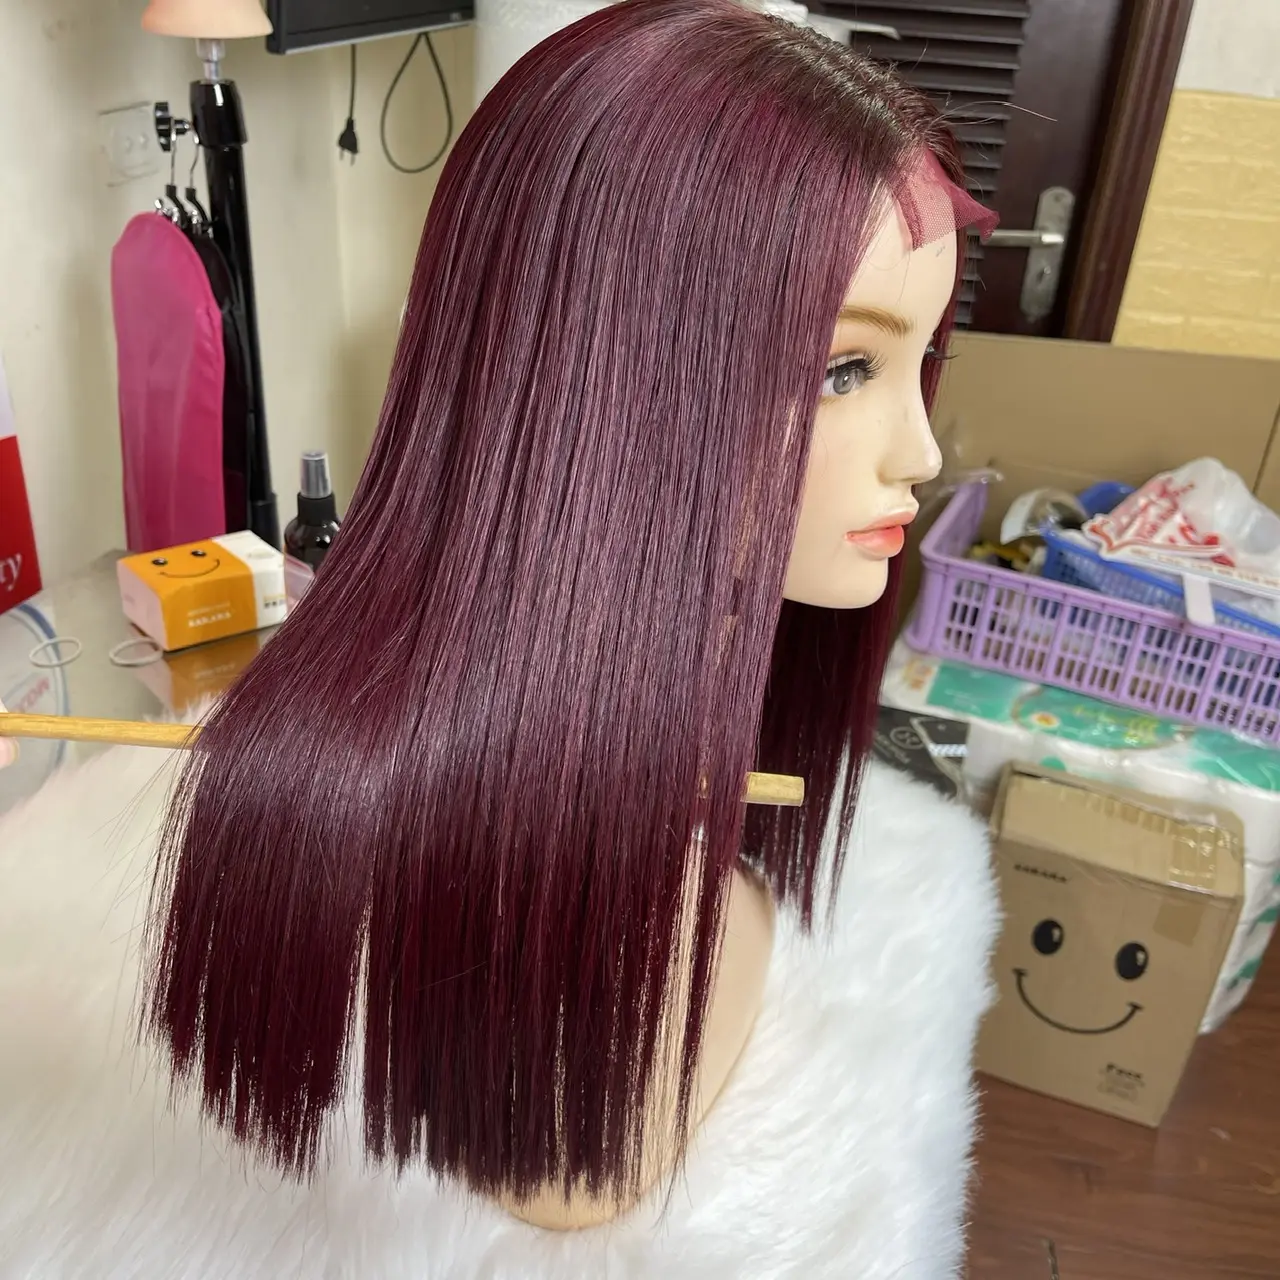 Short Wine Red Bob Human Hair Wigs With Full Bangs Bone Straight Wigs for Black Women Hair Extensions From Vietnam Factory